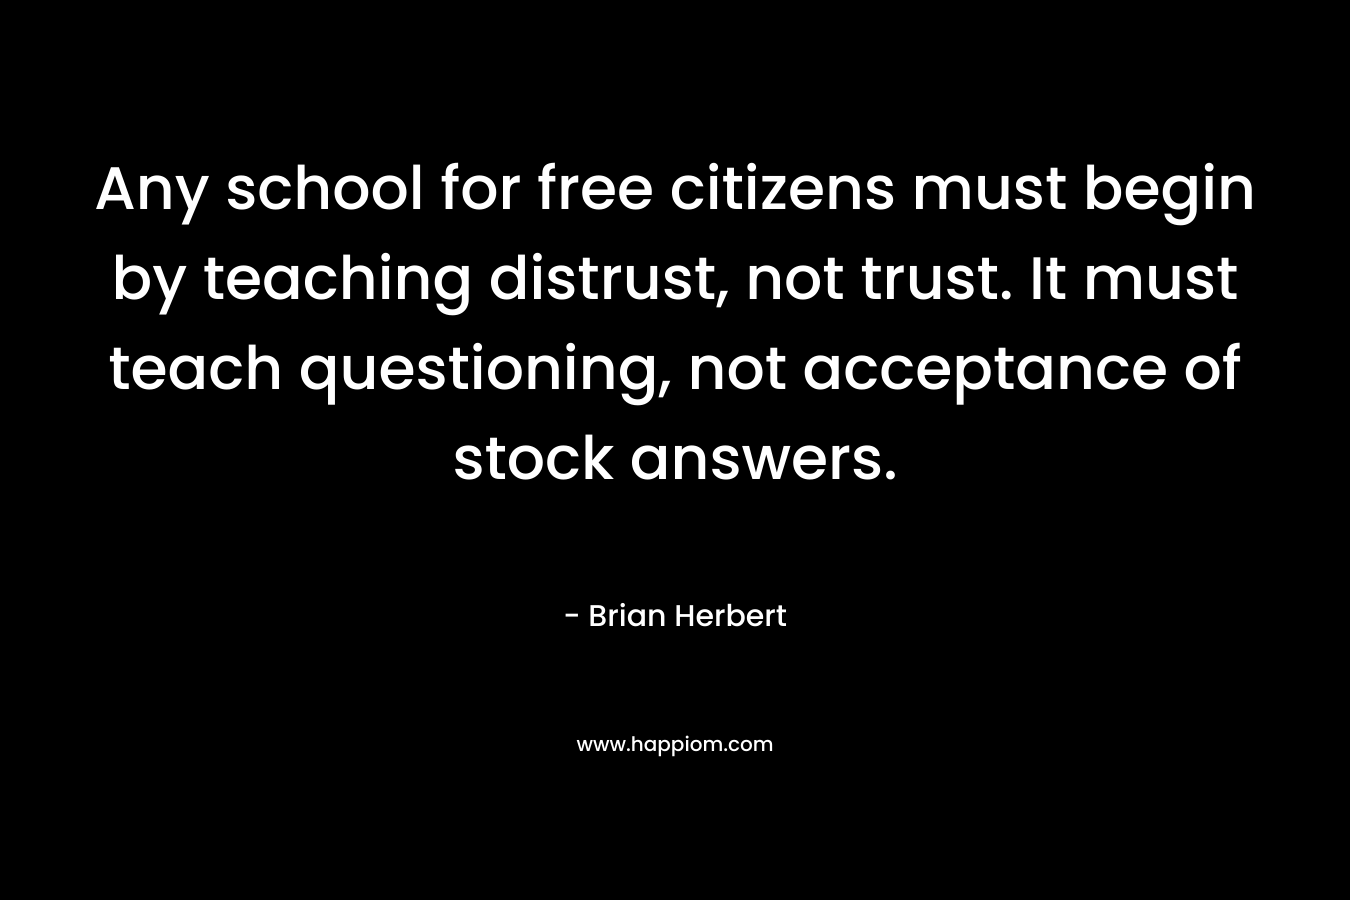 Any school for free citizens must begin by teaching distrust, not trust. It must teach questioning, not acceptance of stock answers. – Brian Herbert